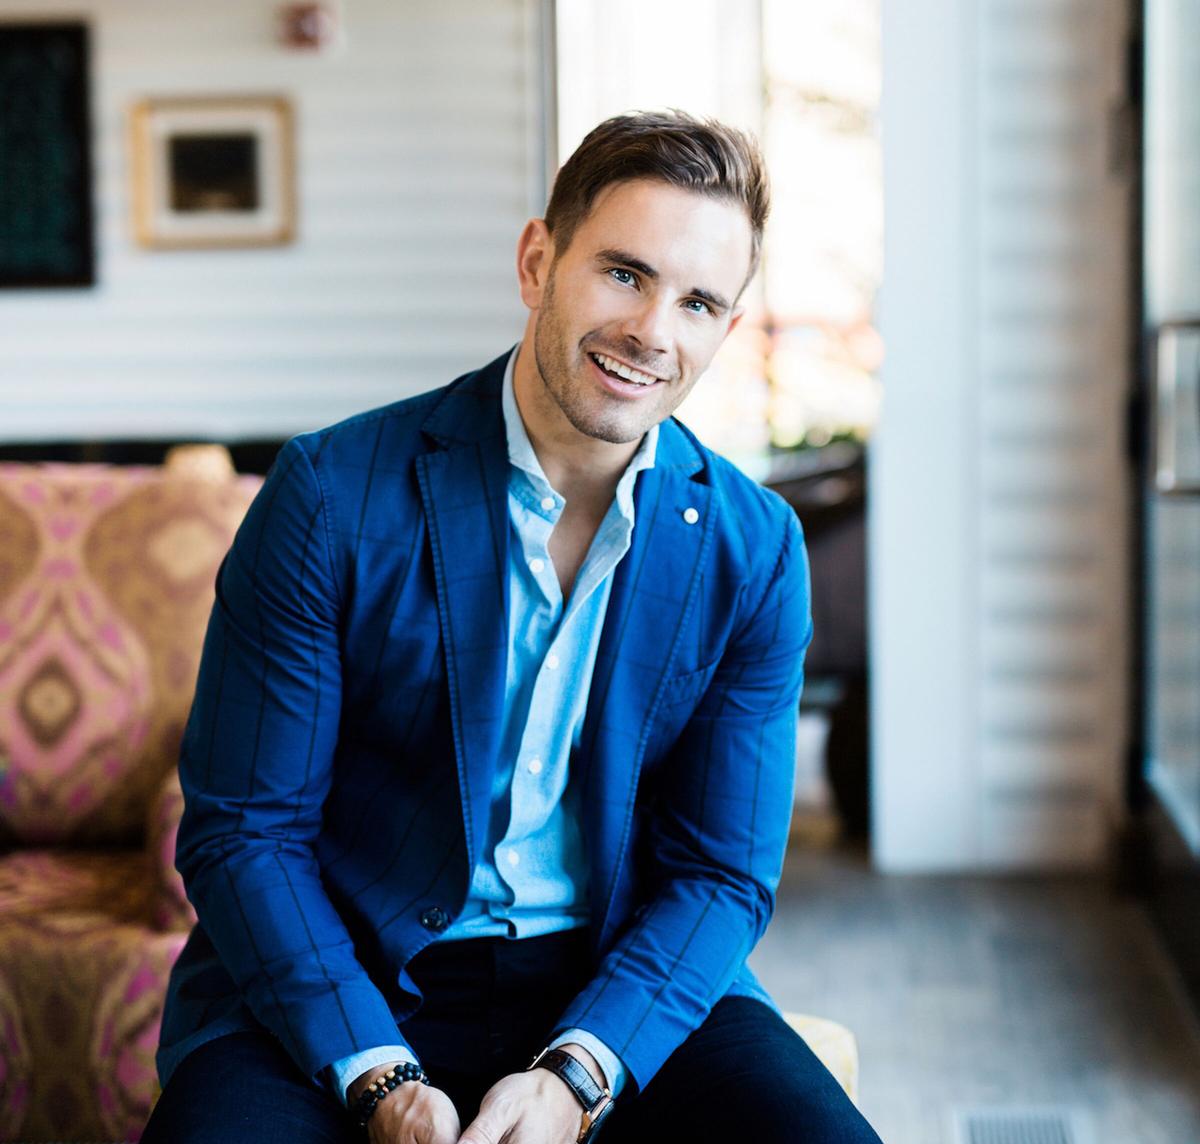 ISPA has announced Seth Mattison as its keynote speaker for the ISPA Talent Symposium which is taking place on 15 April 2020, at the Ritz-Carlton Bacara in Santa Barbara.
/ 